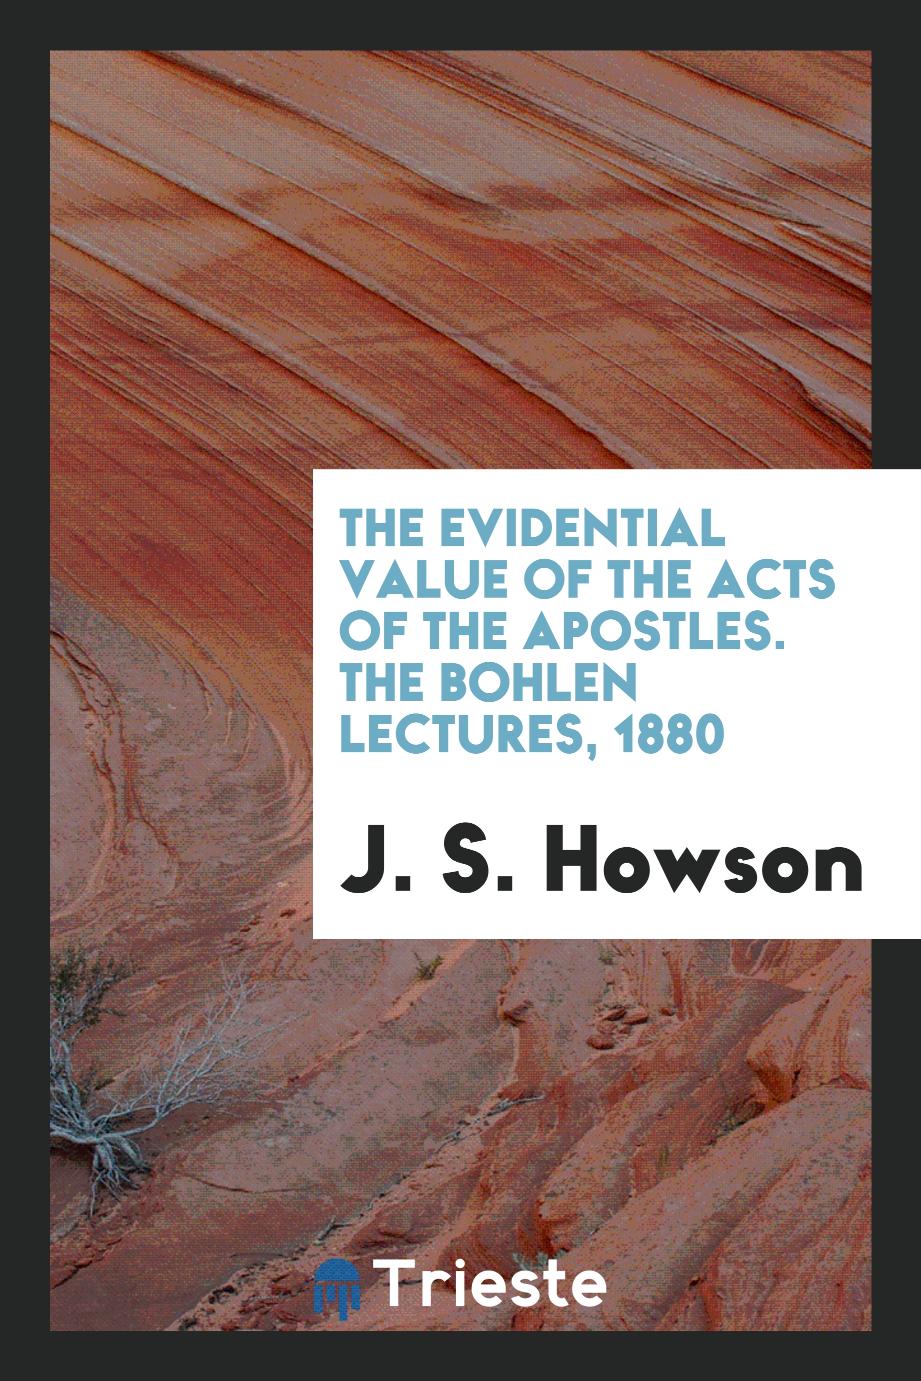 The Evidential Value of the Acts of the Apostles. The Bohlen Lectures, 1880